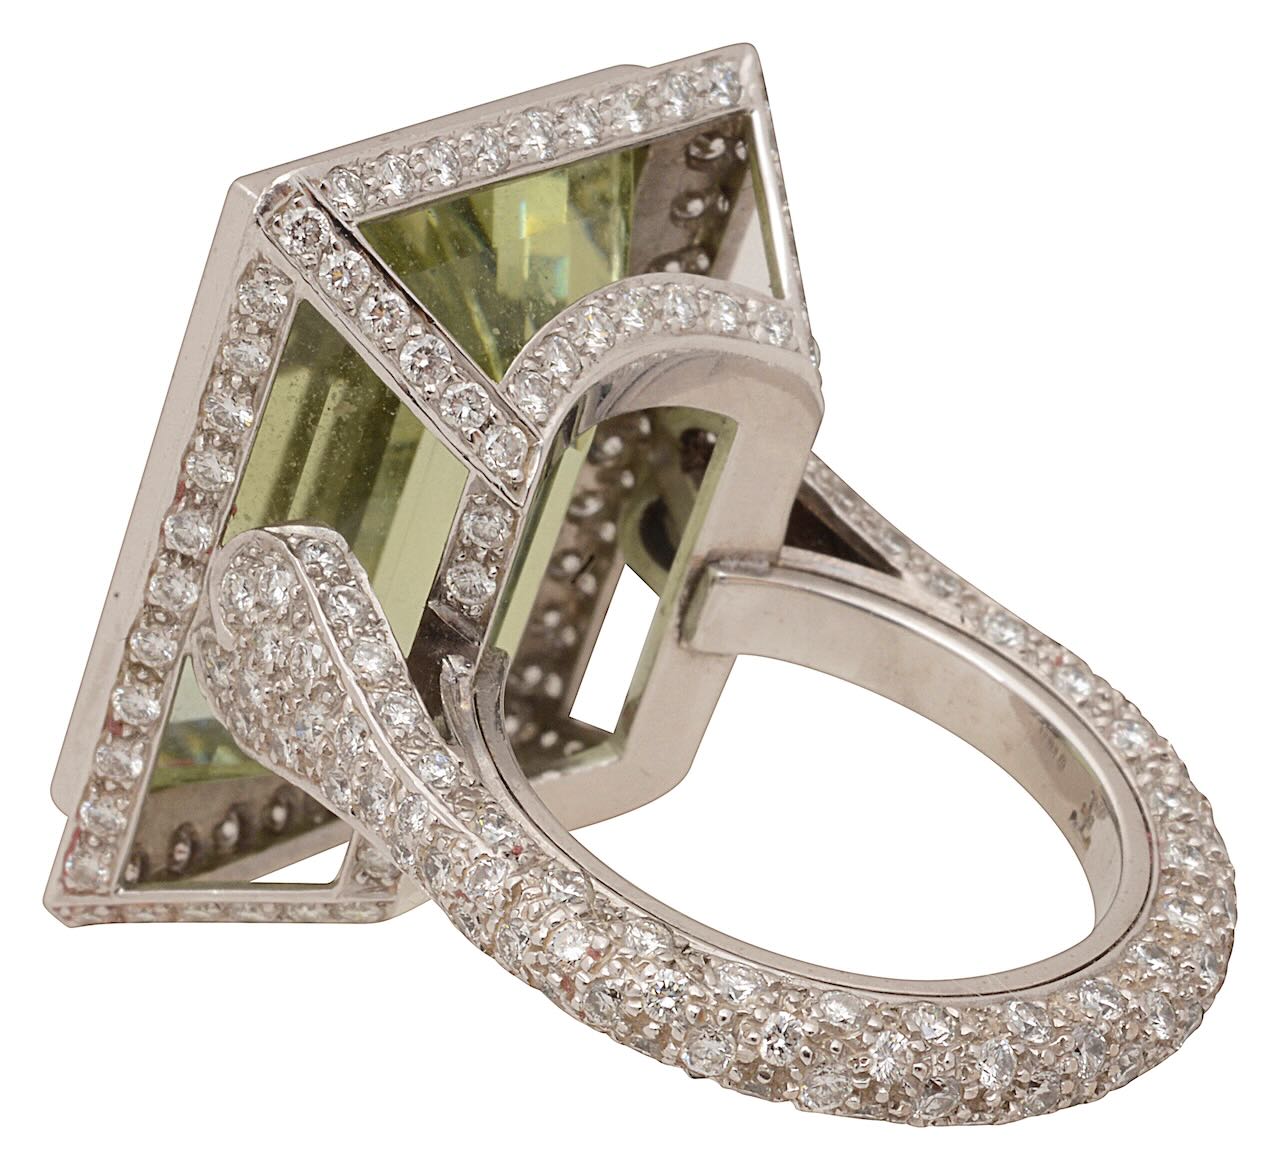 Theo Fennell A green beryl and diamond-set 'Cradle' ring - Image 3 of 3